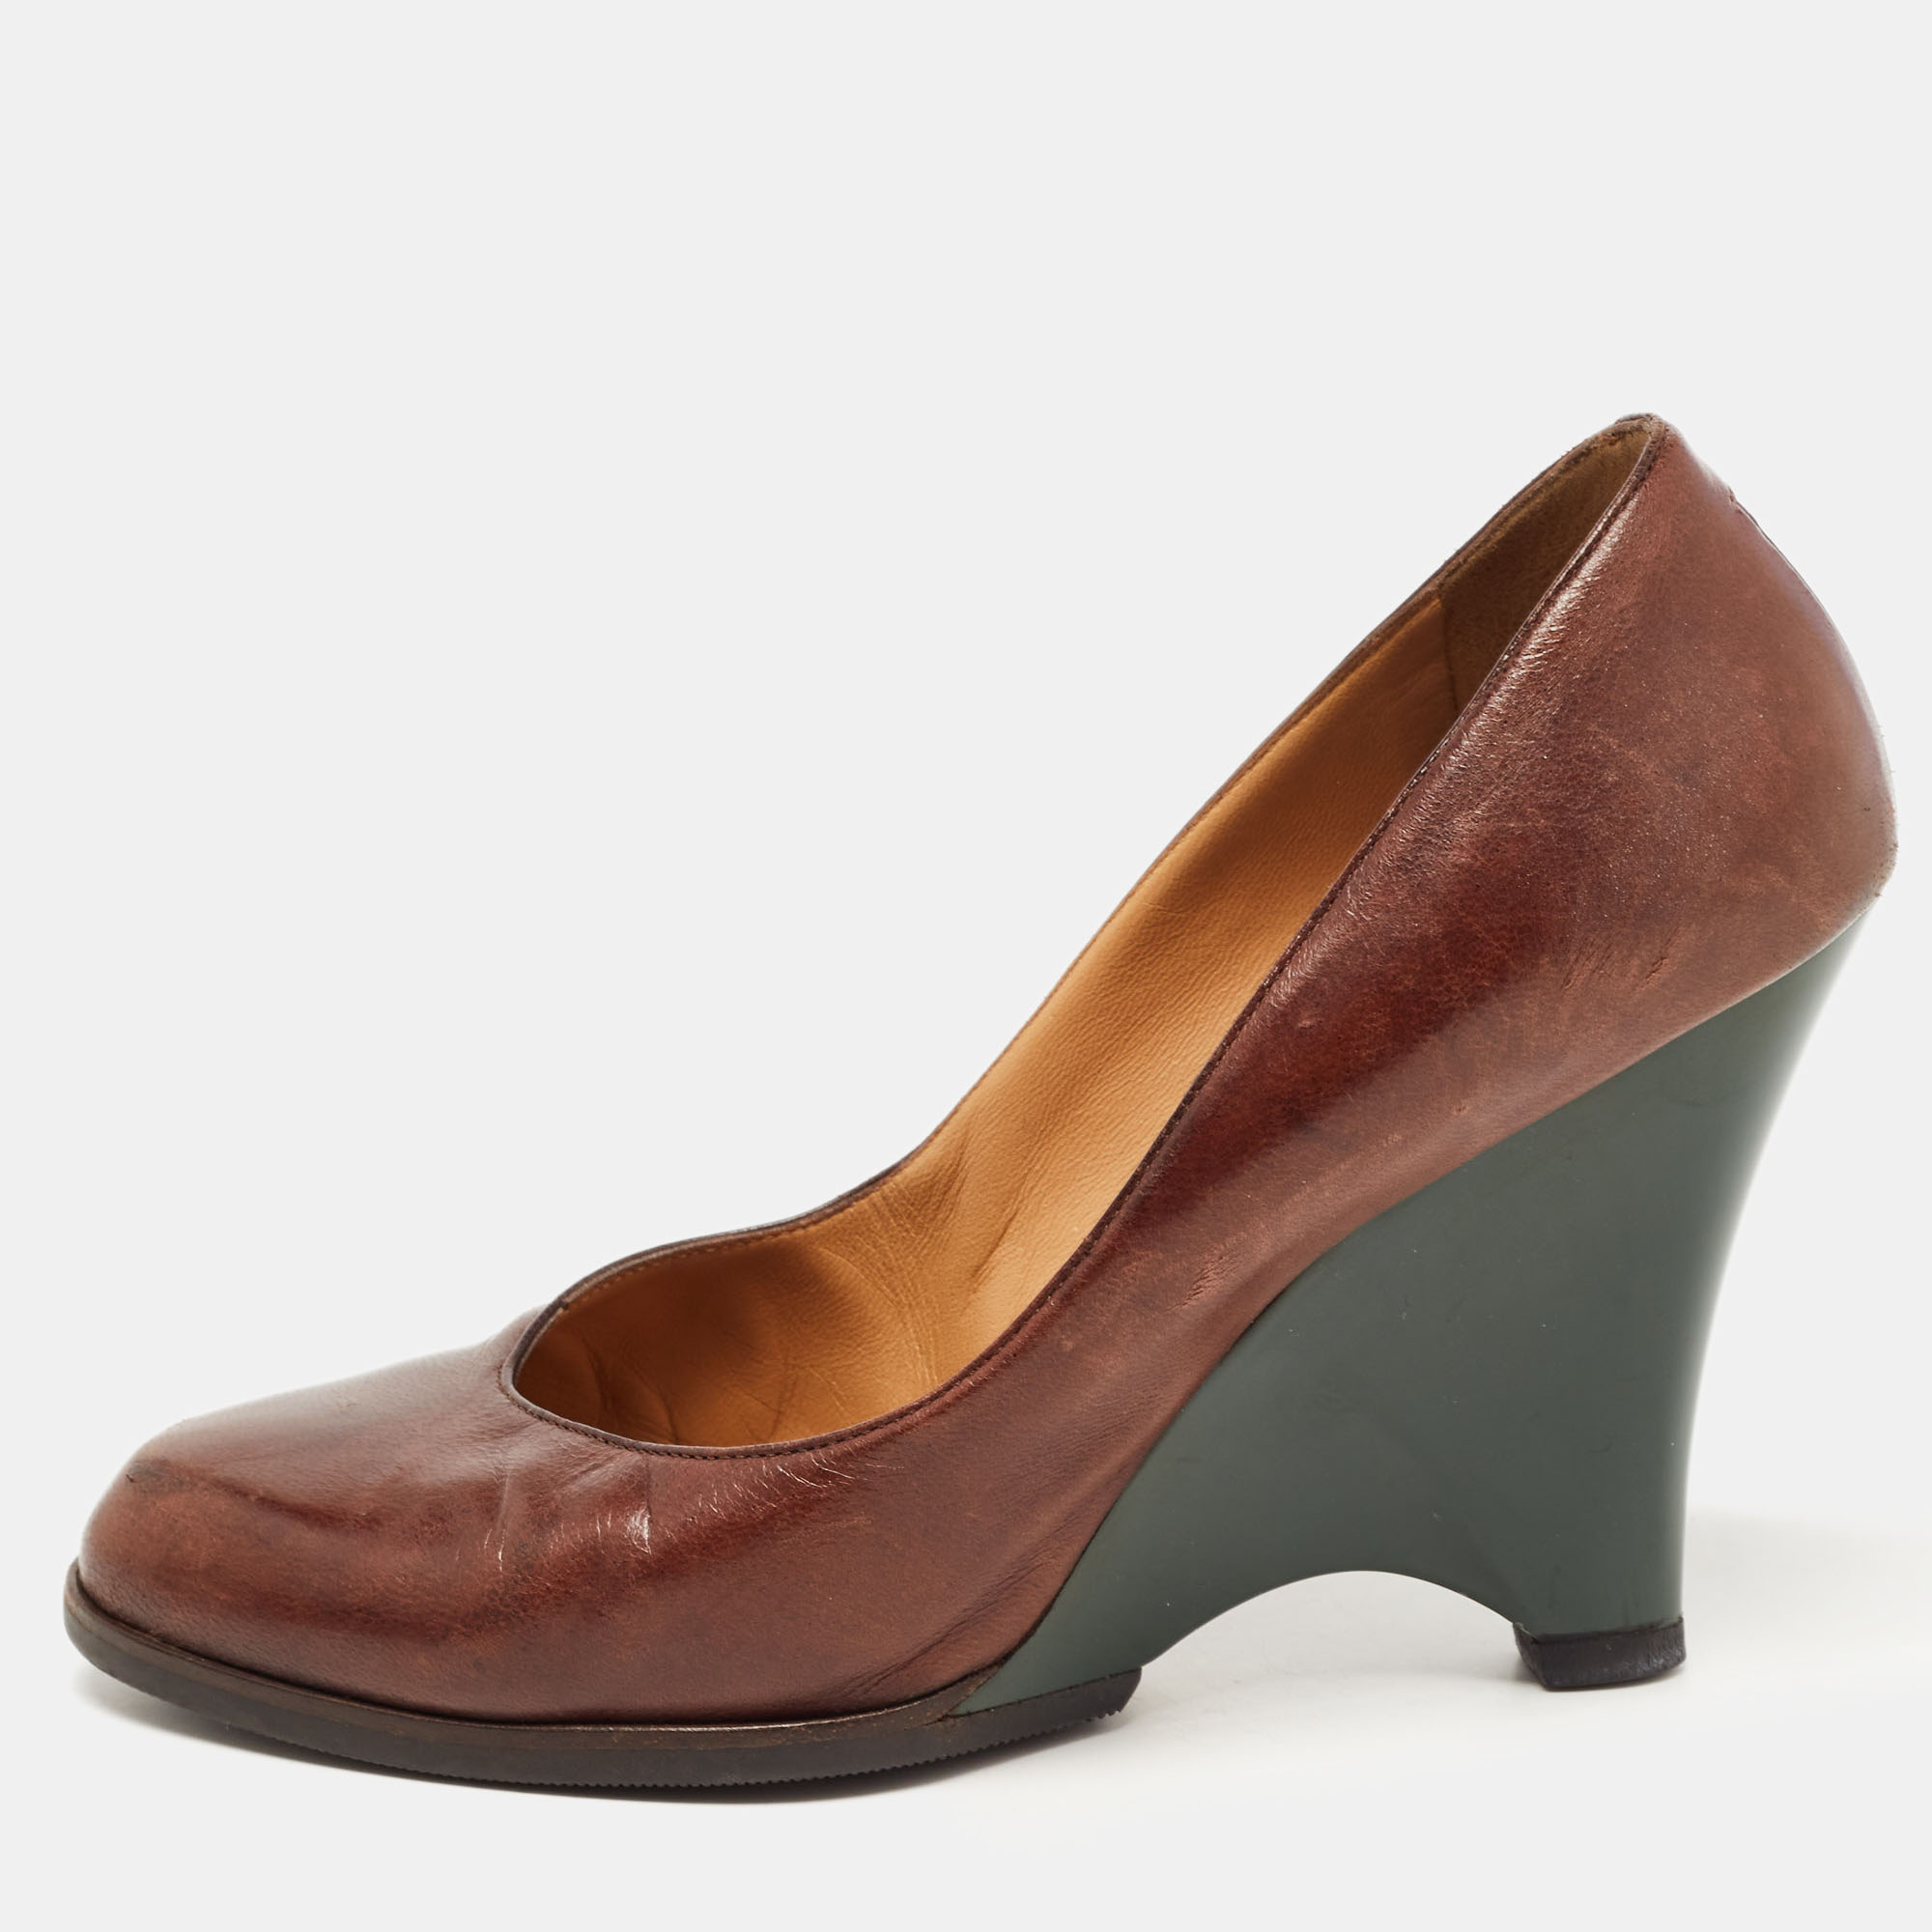 Marni Brown Leather Wedge Pumps Size 37